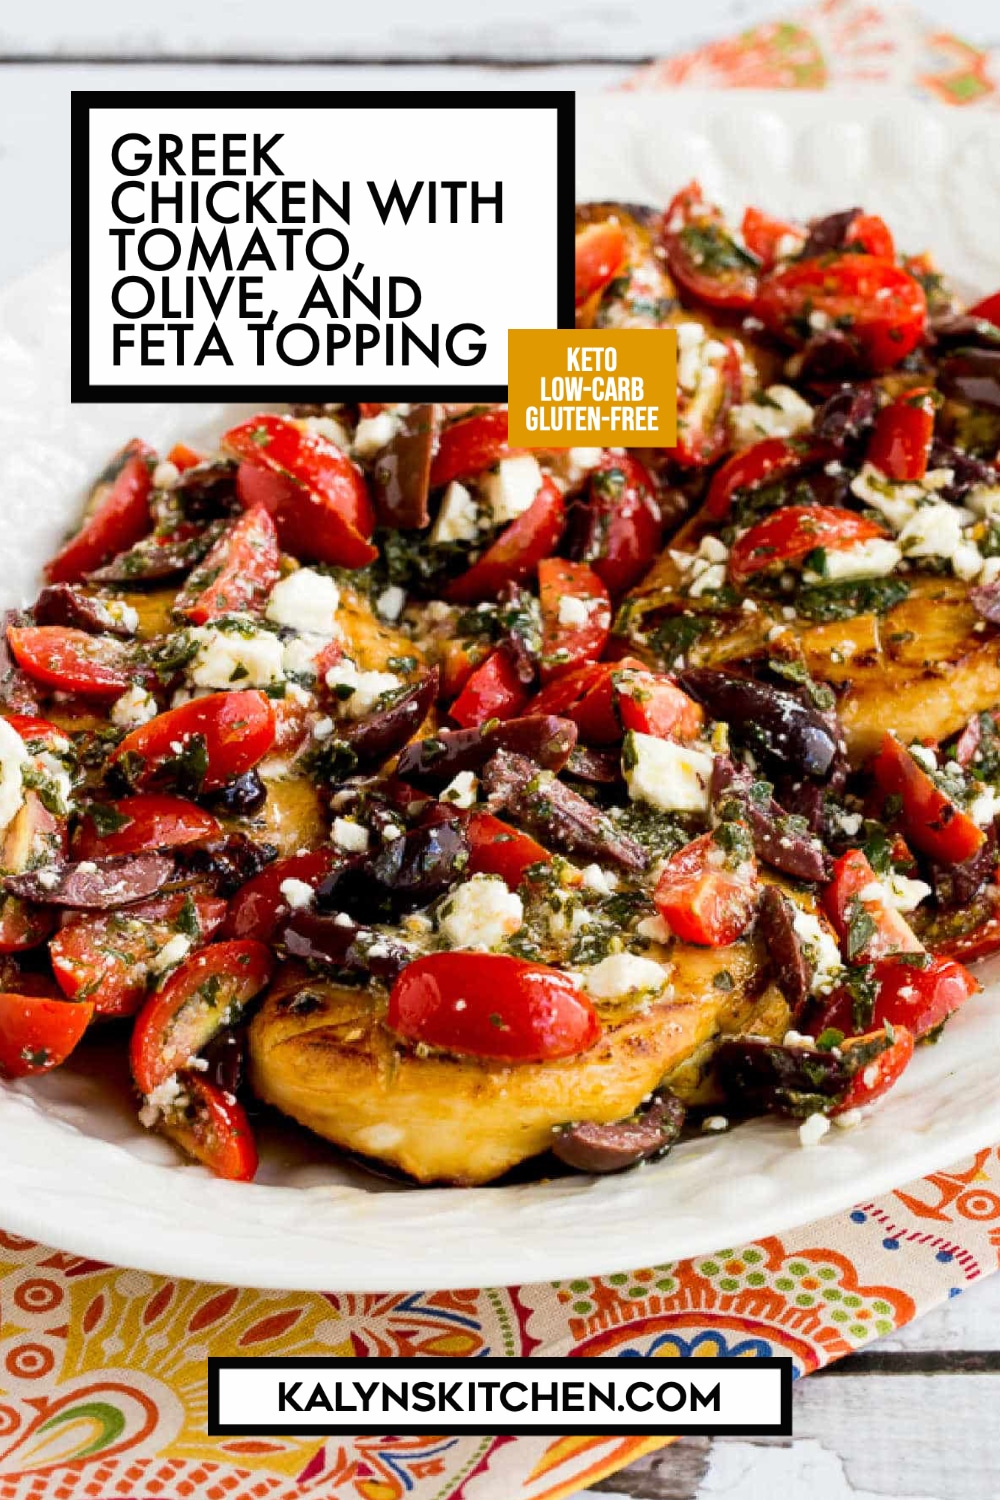 Pinterest image of Greek Chicken with Tomato, Olive, and Feta Topping